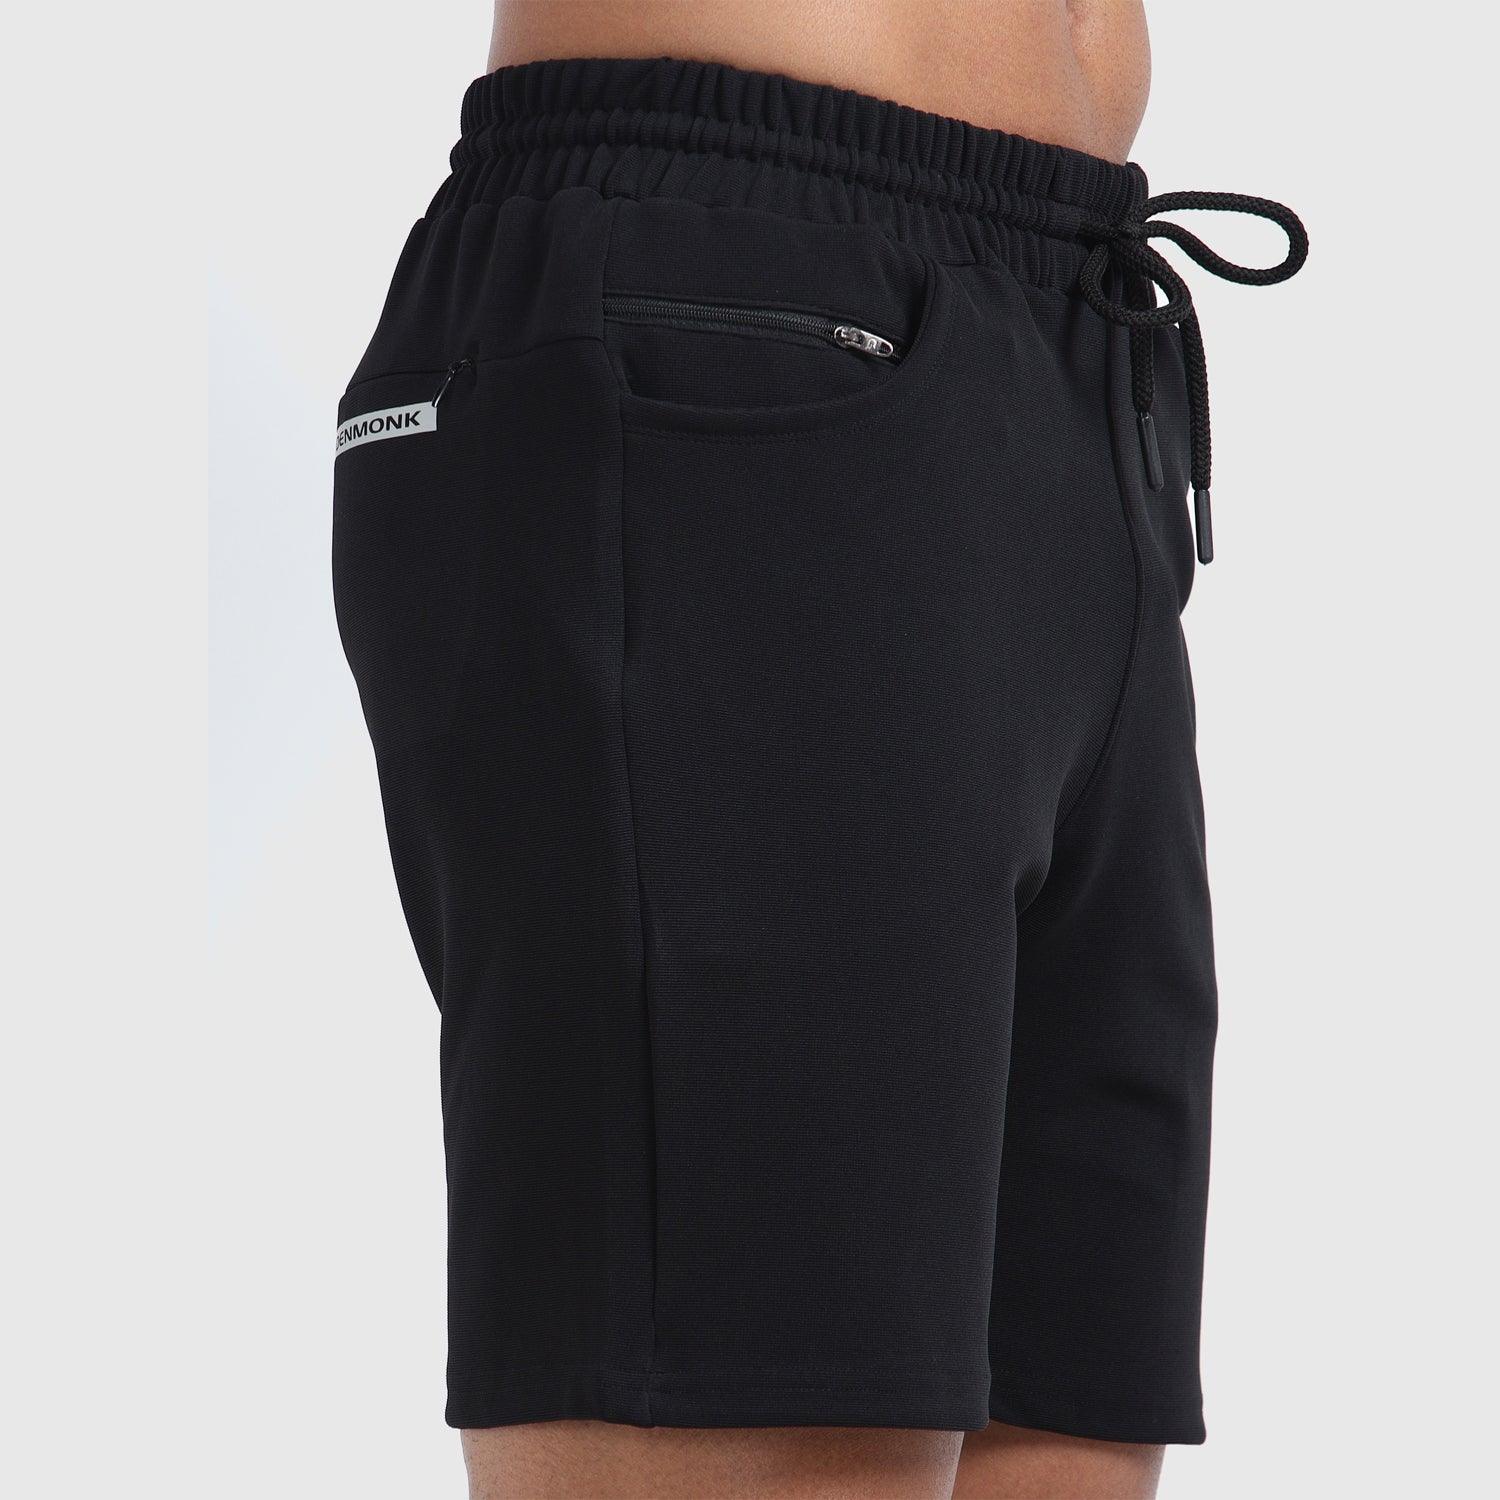 Denmonk's fashionable Retroglide Shorts black shorts for men will boost your level of gym fitness.